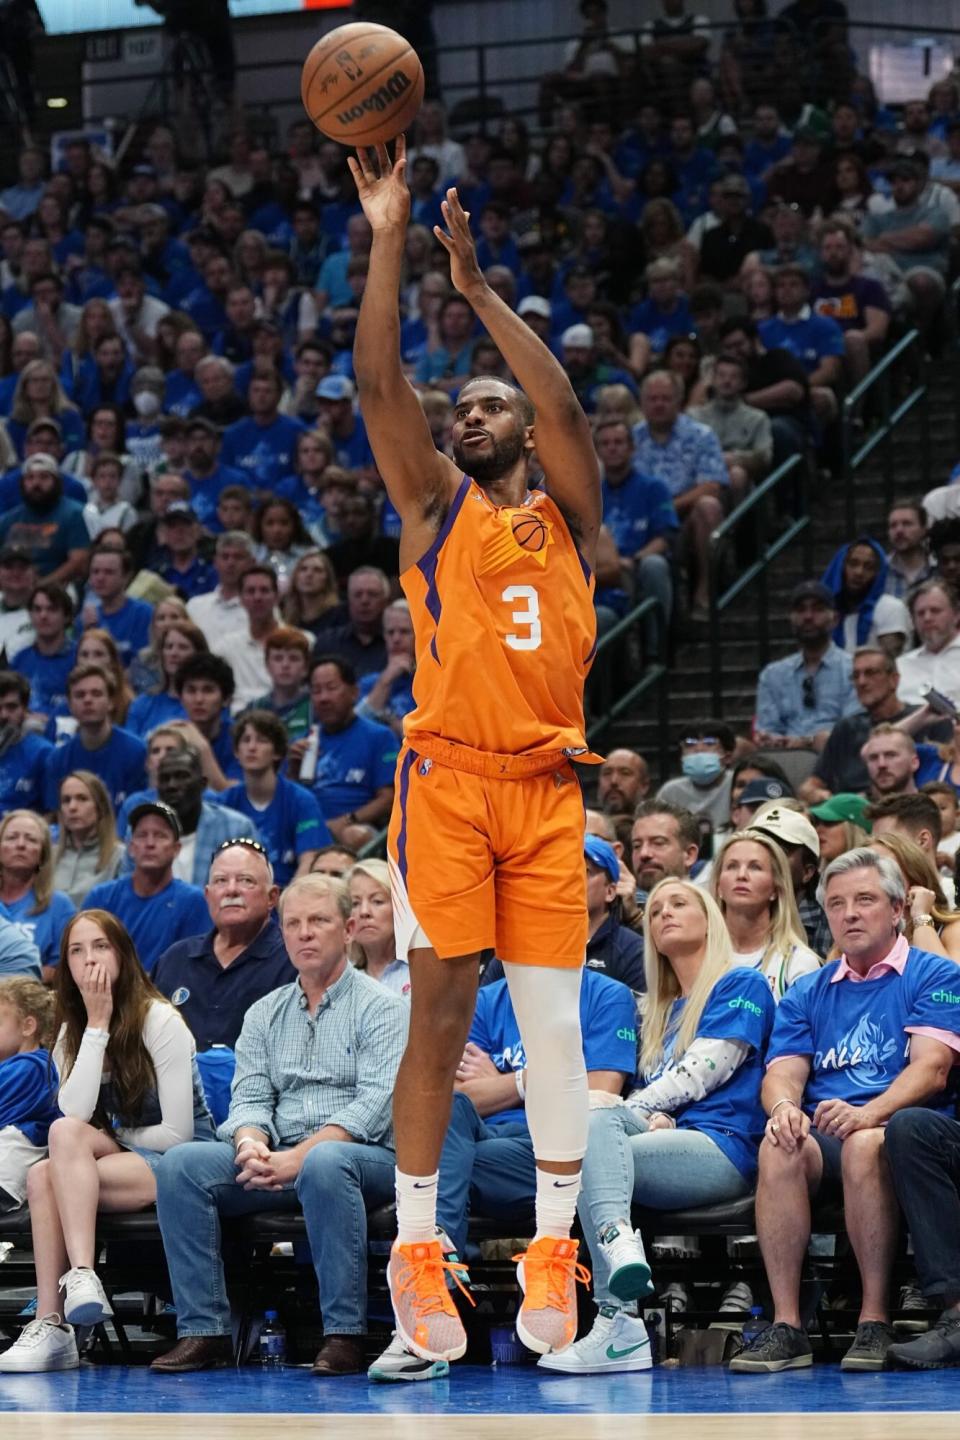 DALLAS, TX - MAY 8: Chris Paul #3 of the Phoenix Suns shoots a three point basket during the game against the Dallas Mavericks during Game 4 of the 2022 NBA Playoffs Western Conference Semifinals on May 8, 2022 at the American Airlines Center in Dallas, Texas. NOTE TO USER: User expressly acknowledges and agrees that, by downloading and or using this photograph, User is consenting to the terms and conditions of the Getty Images License Agreement. Mandatory Copyright Notice: Copyright 2022 NBAE (Photo by Glenn James/NBAE via Getty Images)